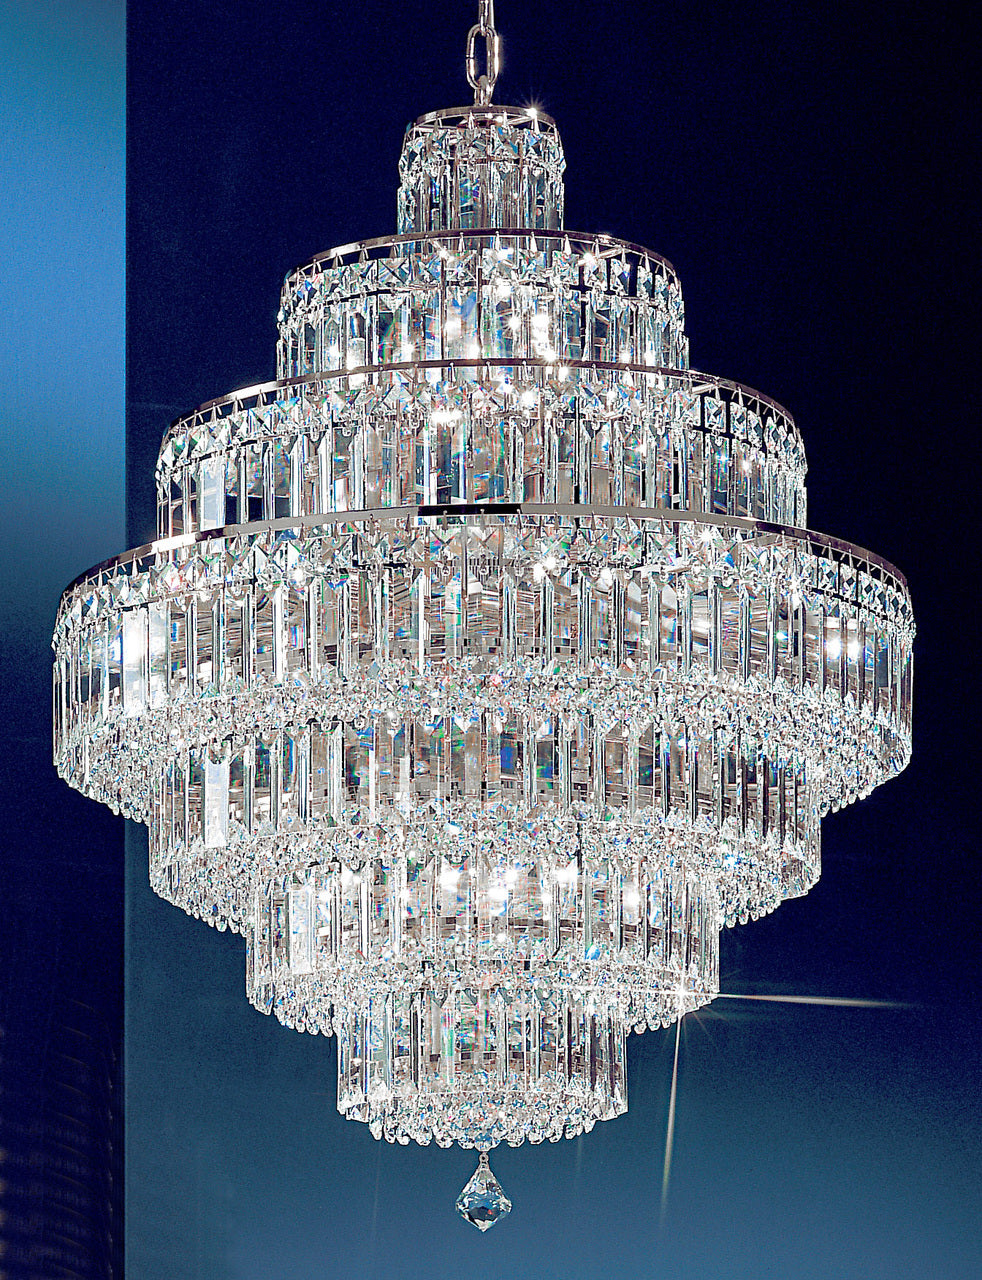 Classic Lighting 1603 CH S Ambassador Crystal Chandelier in Chrome